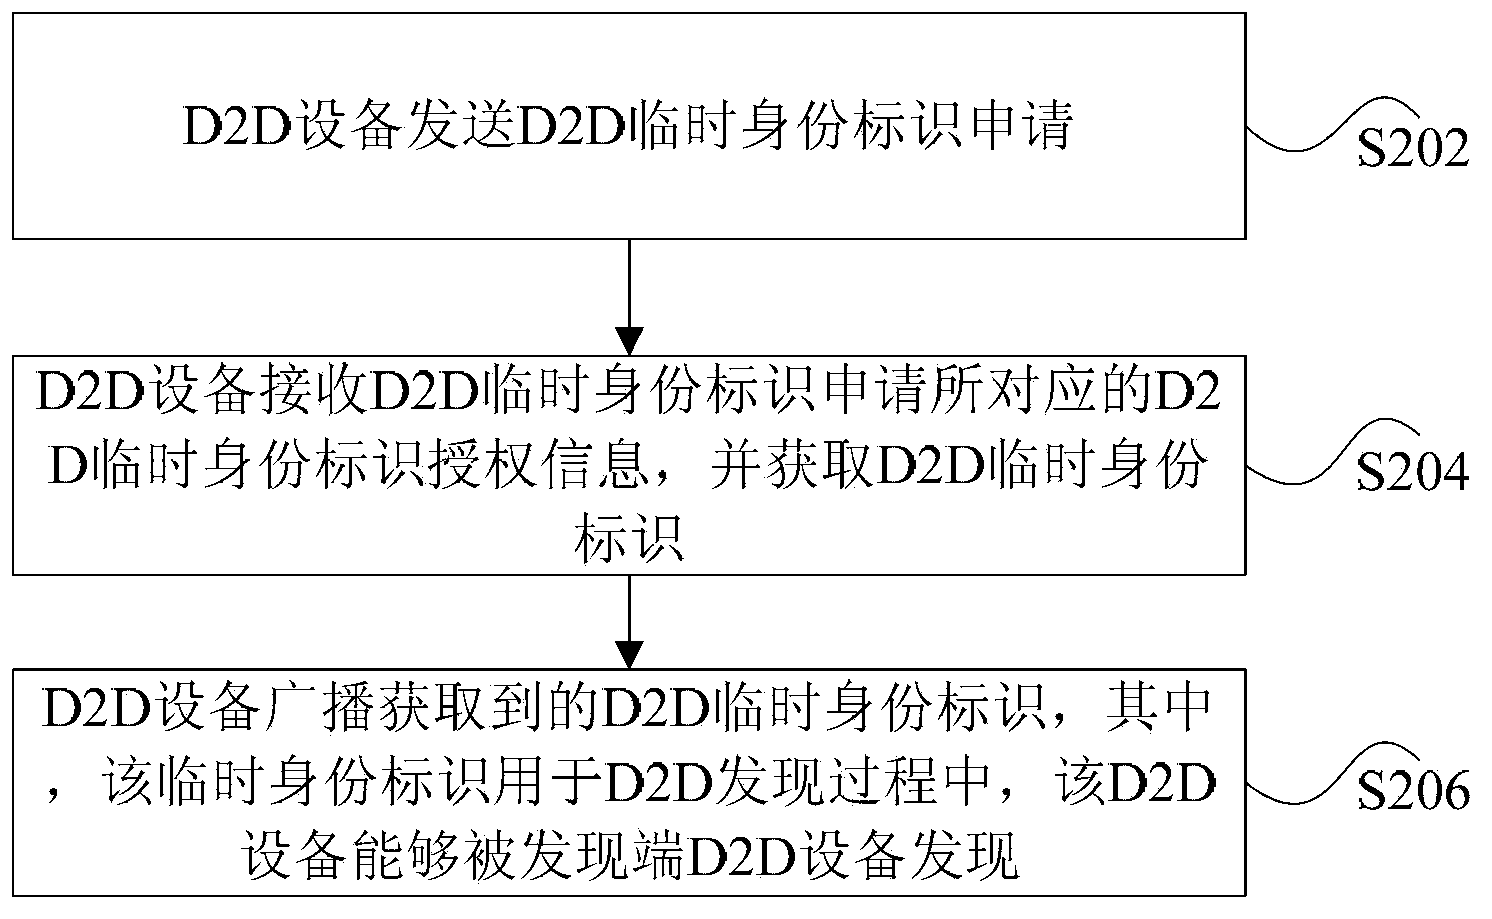 D2D (Device-to-Device) device identification label processing method and D2D device identification label processing device